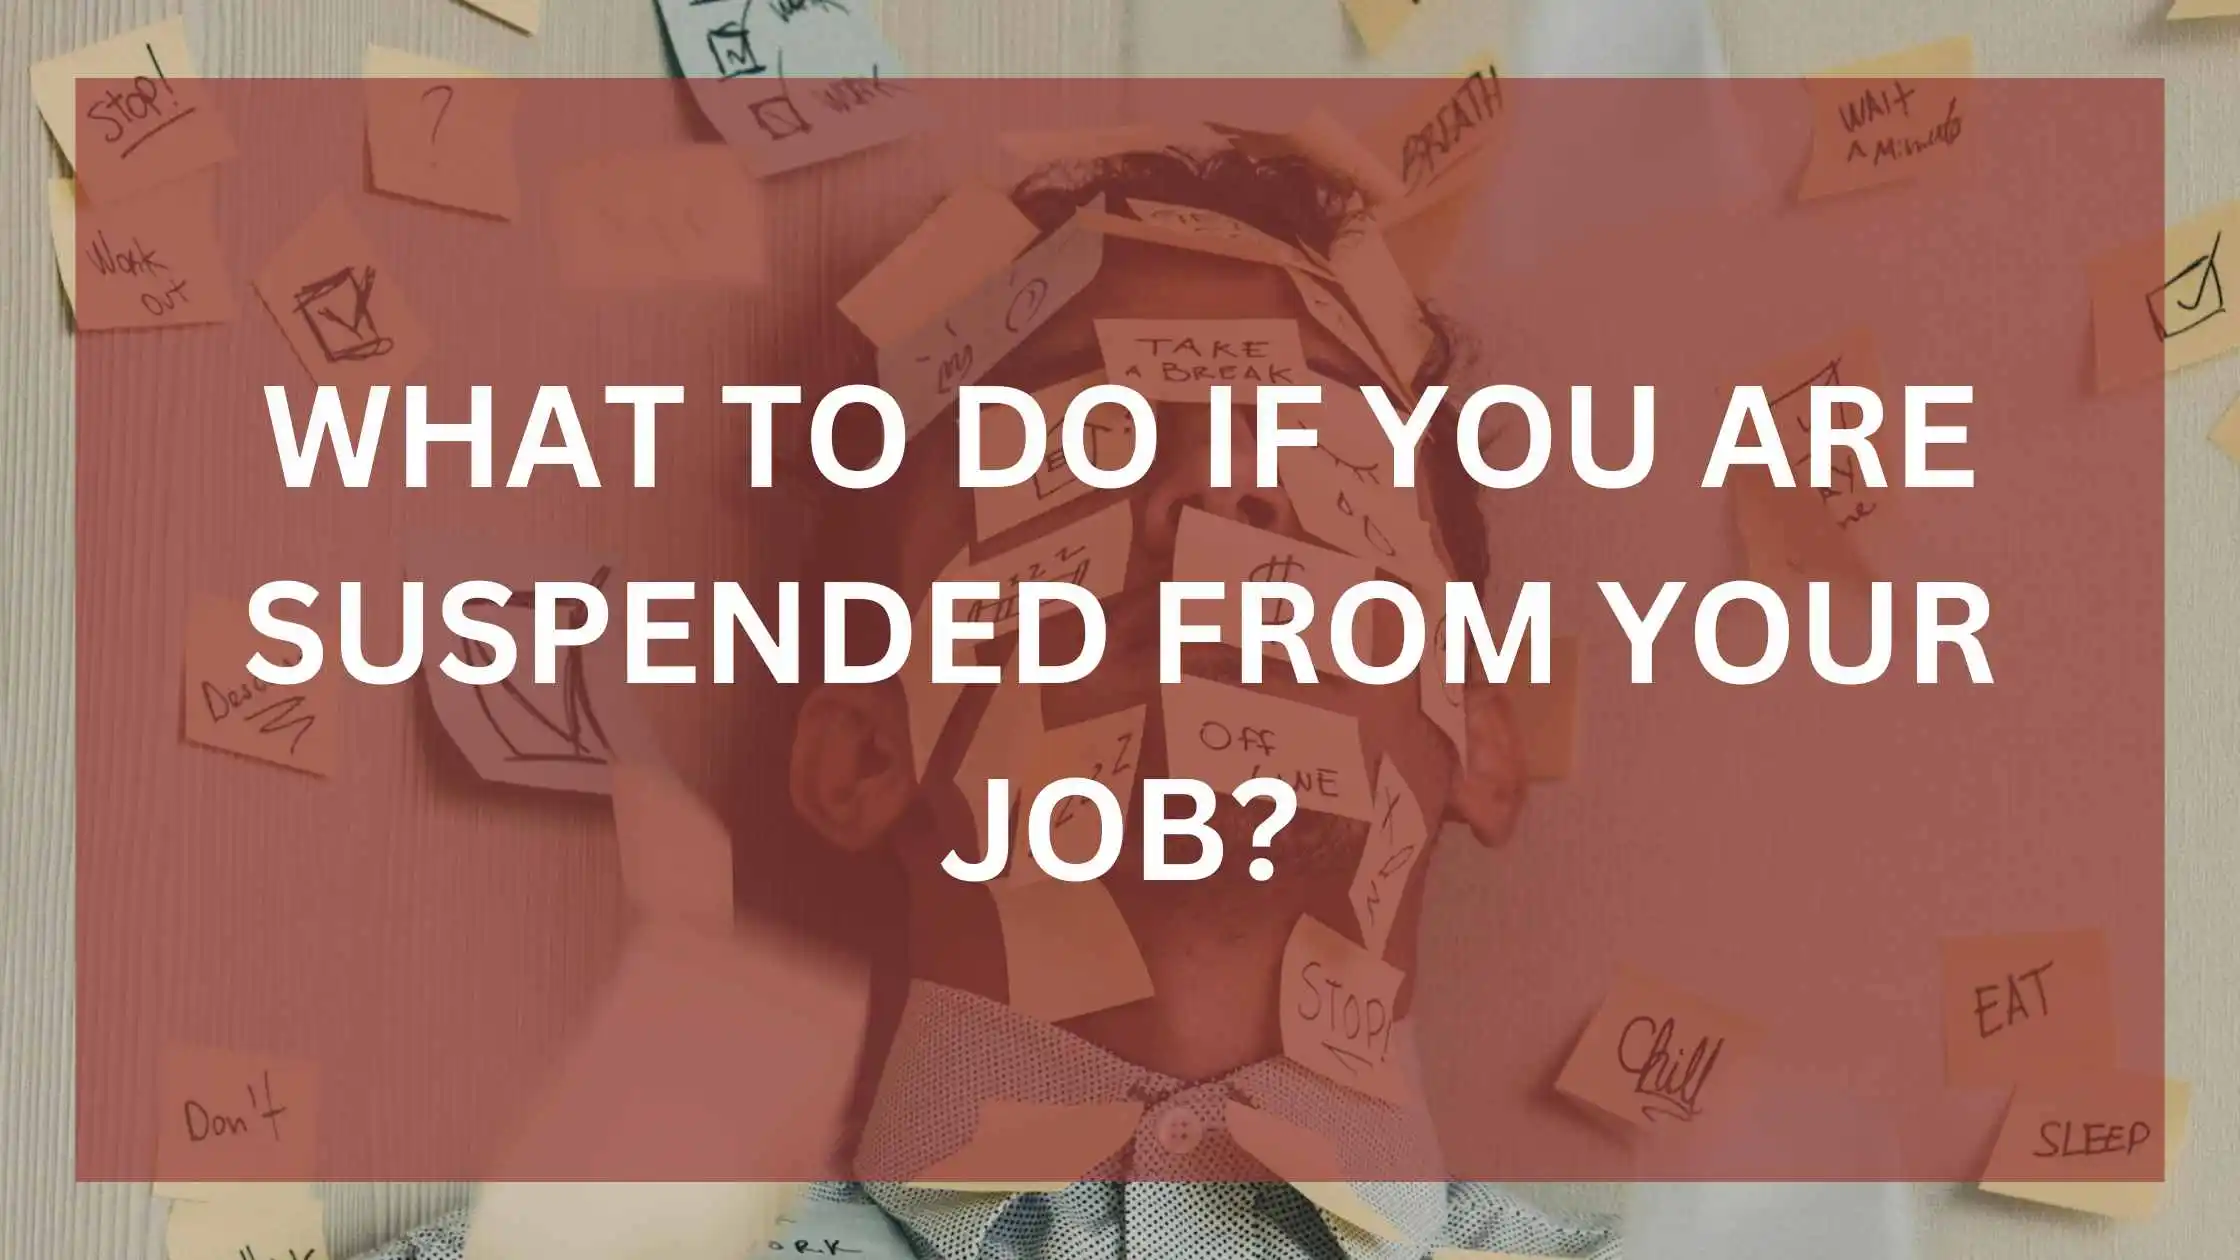 WHAT TO DO IF YOU ARE SUSPENDED FROM YOUR JOB